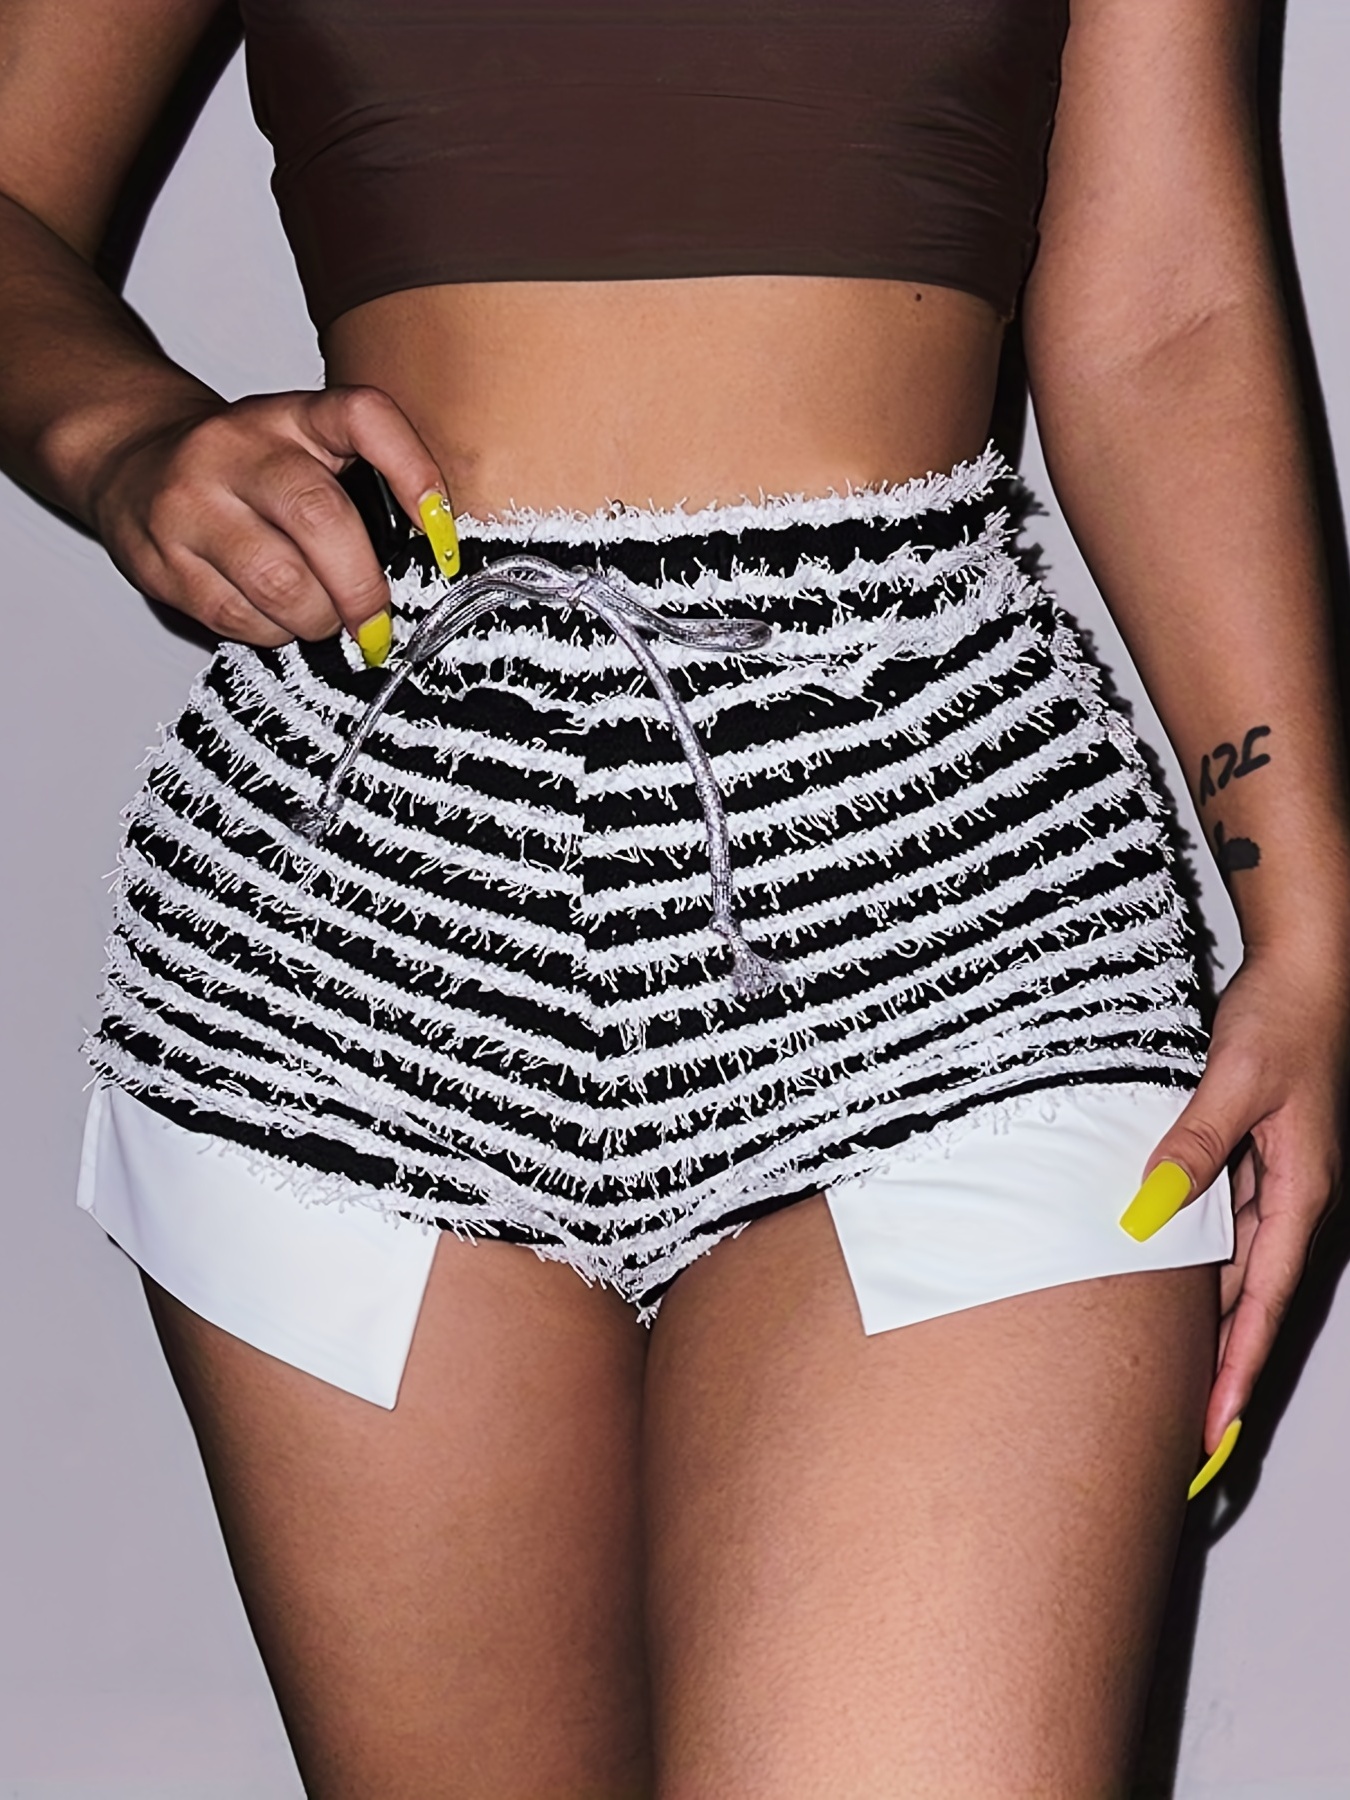 SEXY BOOTY SHORTS  short shorts for women sexy. 